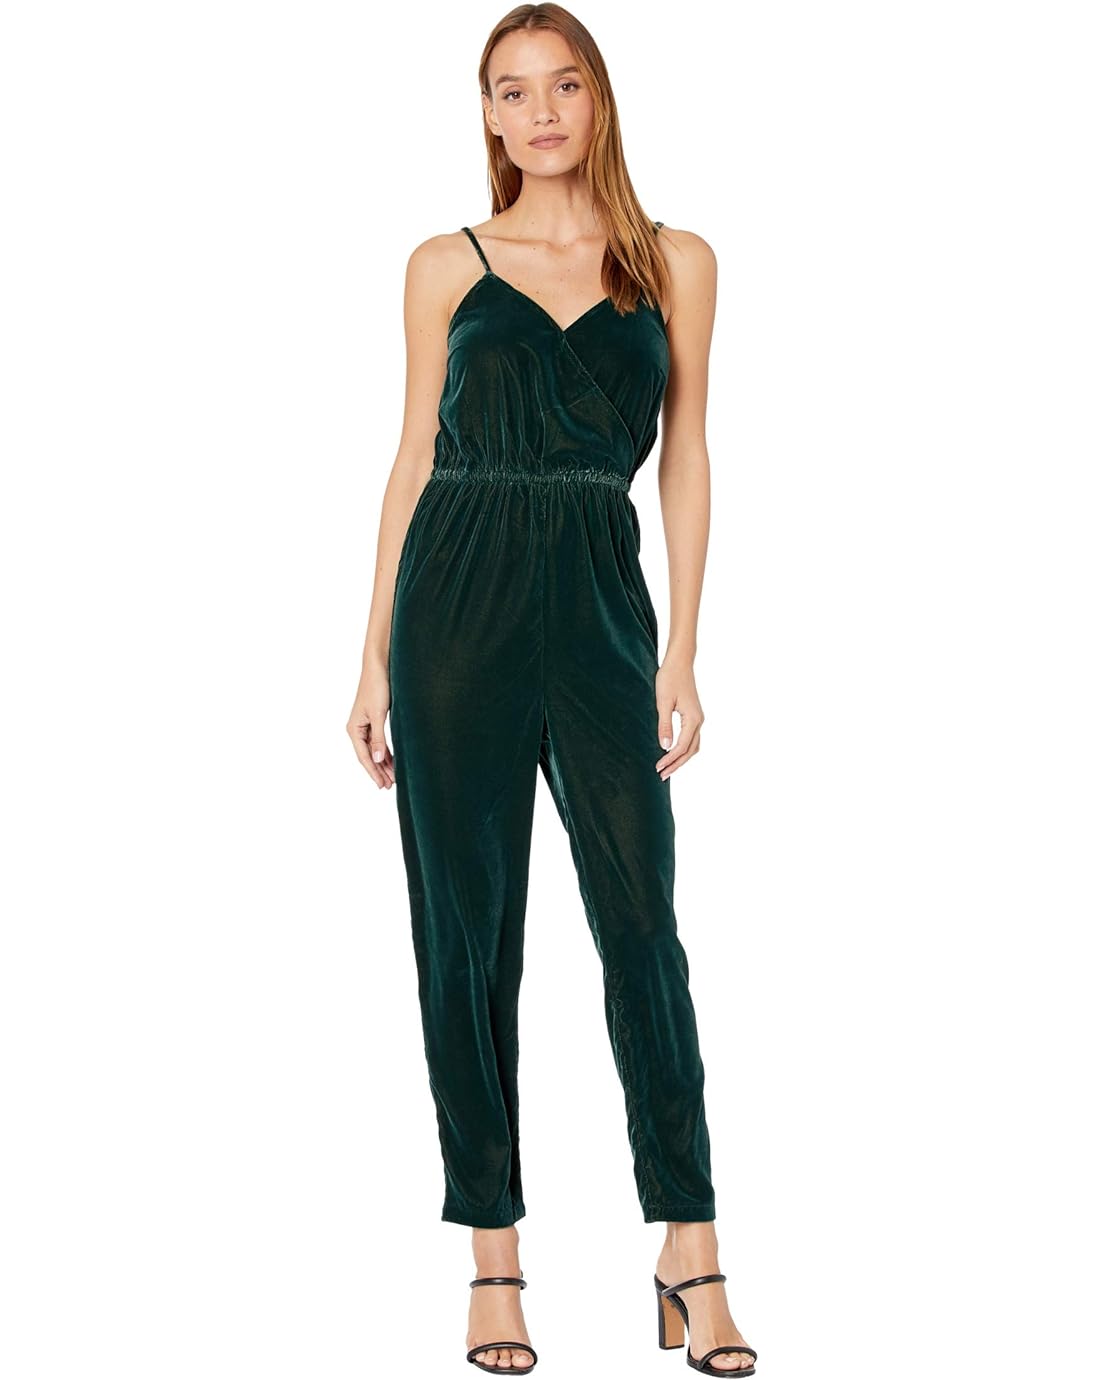 Cupcakes and Cashmere Budapest Jumpsuit